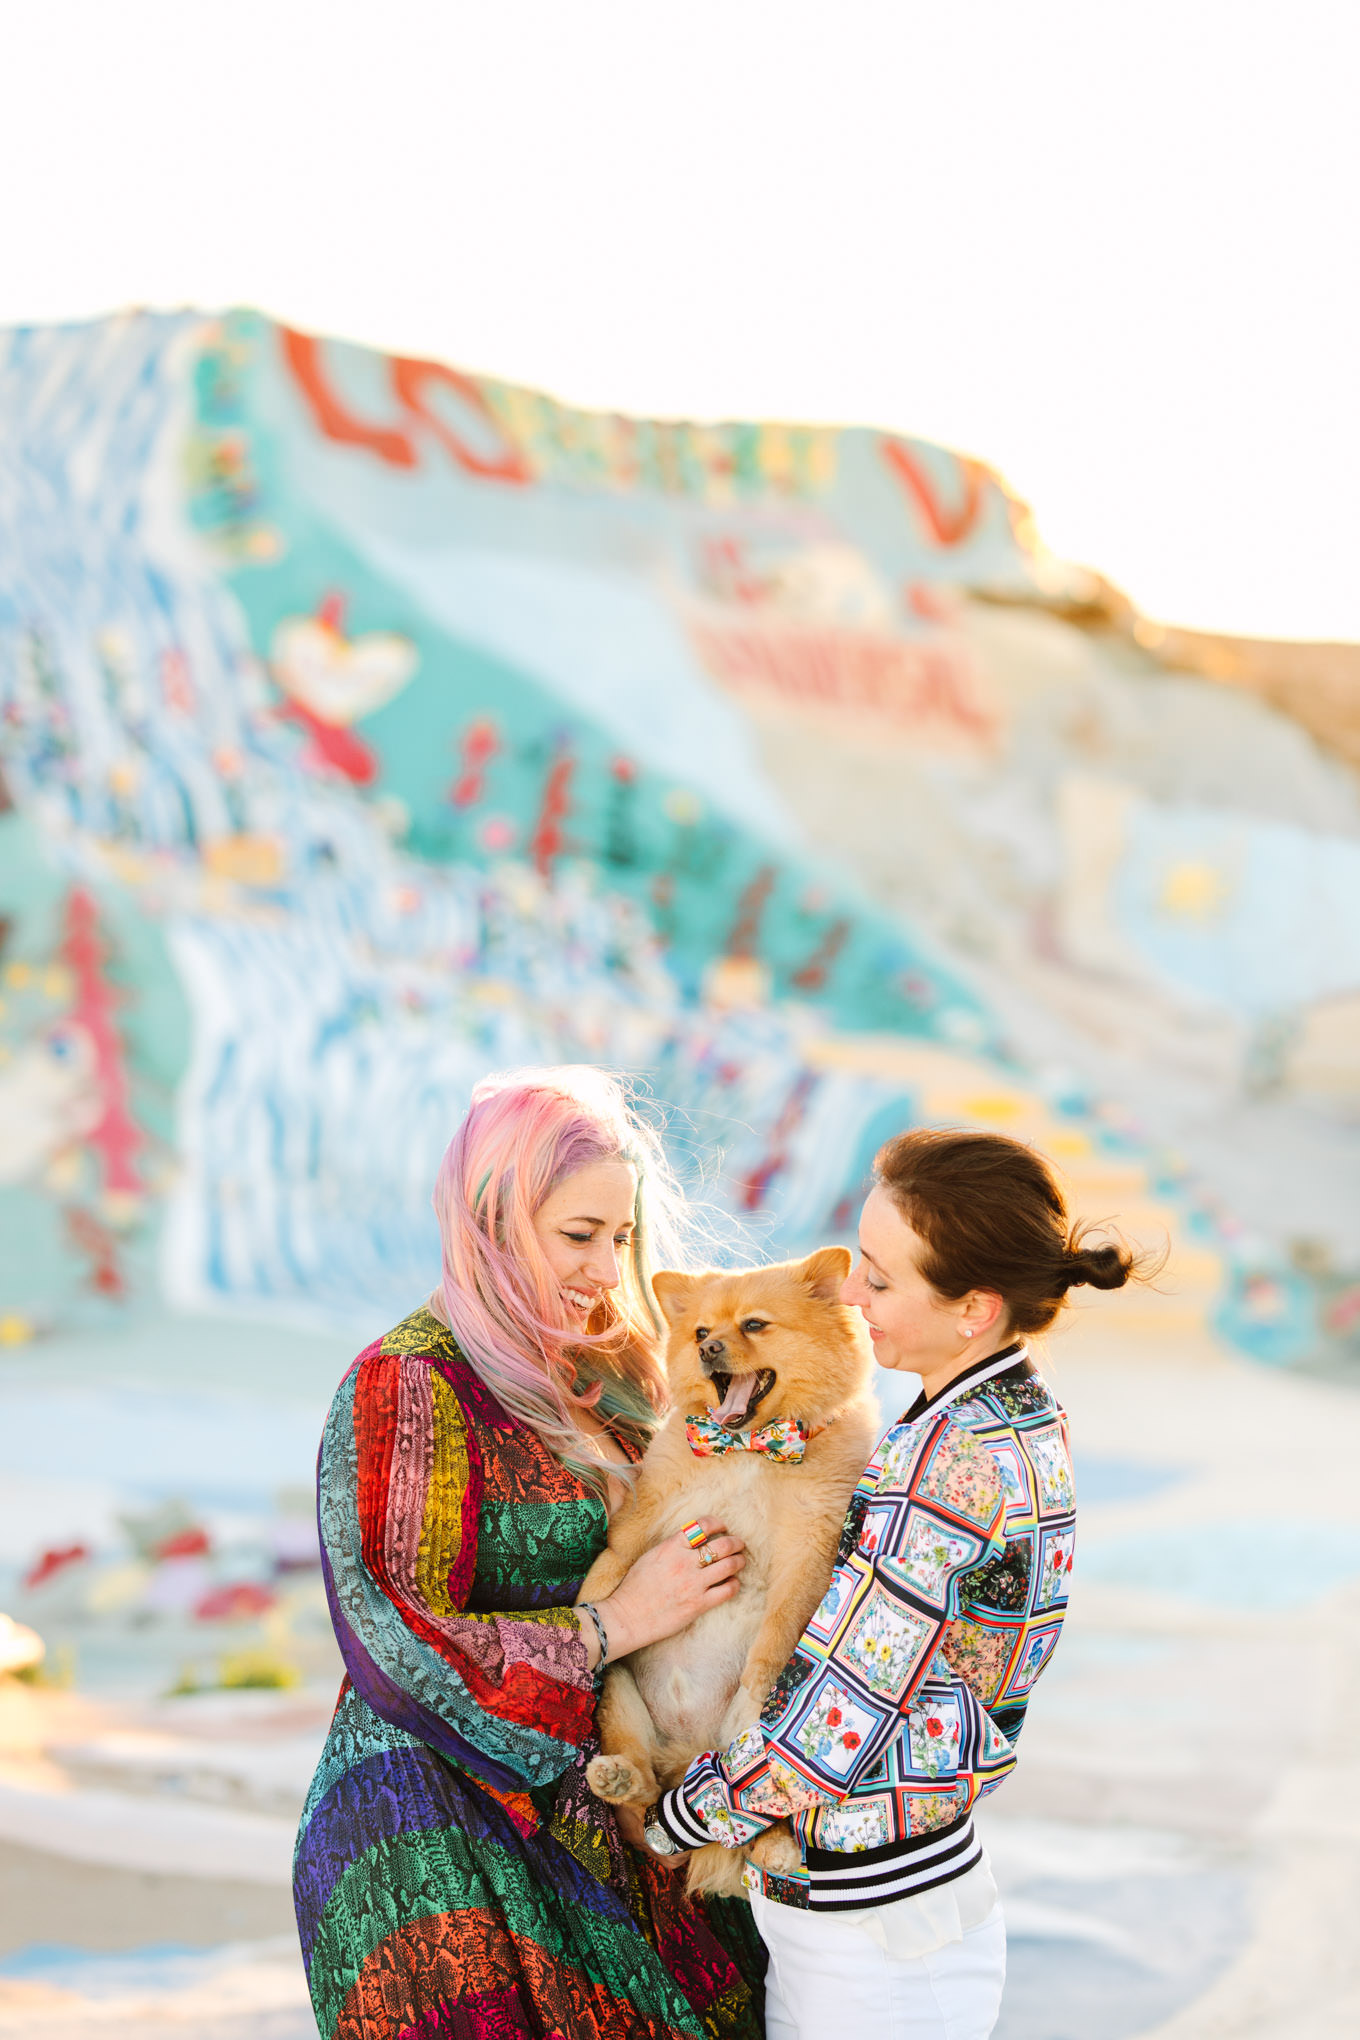 Sunrise Salvation Mountain engagement session | Engagement, elopement, and wedding photography roundup of Mary Costa’s favorite images from 2020 | Colorful and elevated photography for fun-loving couples in Southern California | #2020wedding #elopement #weddingphoto #weddingphotography   Source: Mary Costa Photography | Los Angeles